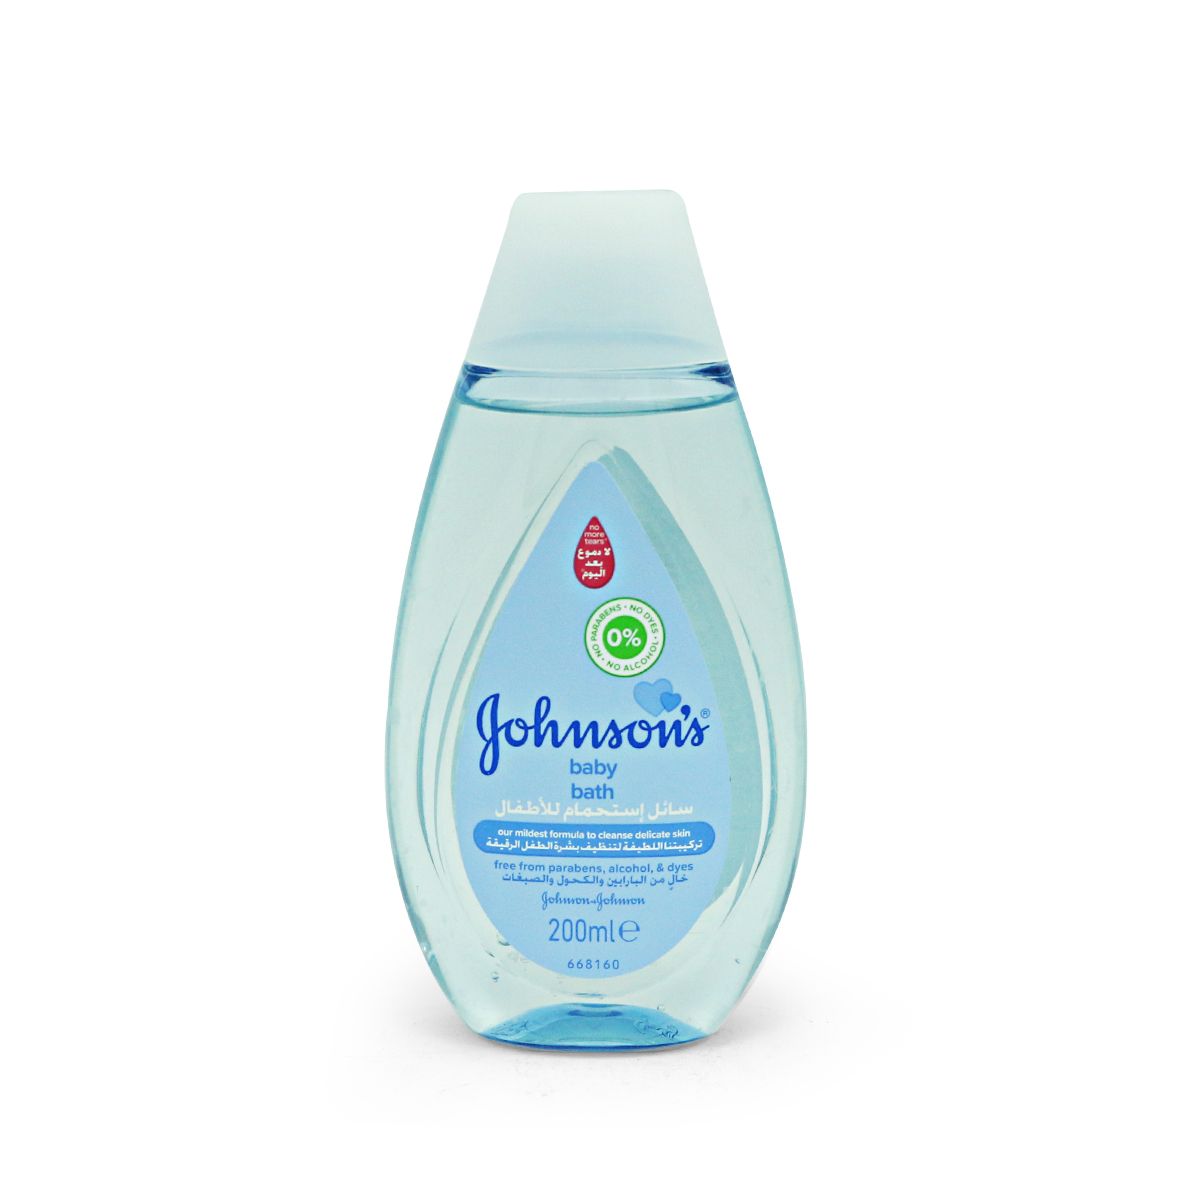 J&j Baby Bath 200ml product available at family pharmacy online buy now at qatar doha